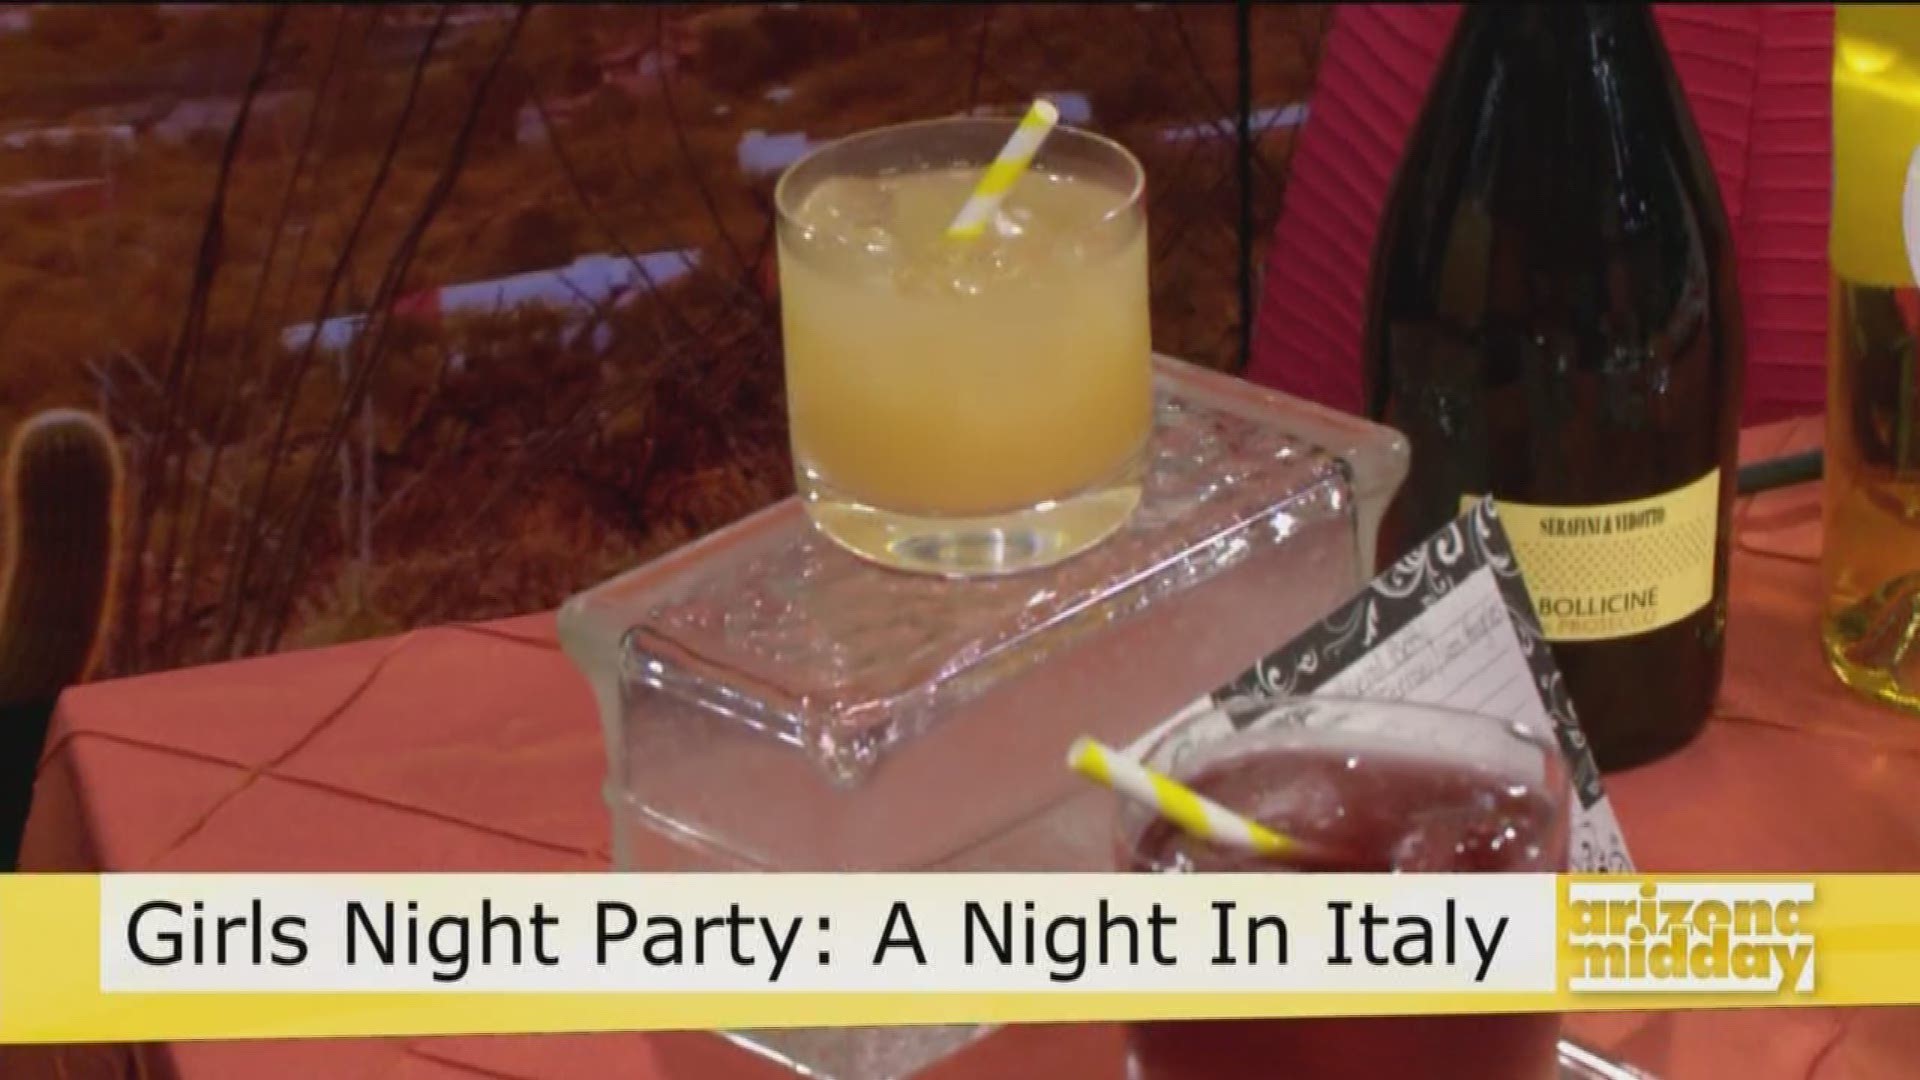 Sally Arnold from Celebrations by Sally gives us some tips on creating your own Italian trip close to home including three tasty drink recipes.